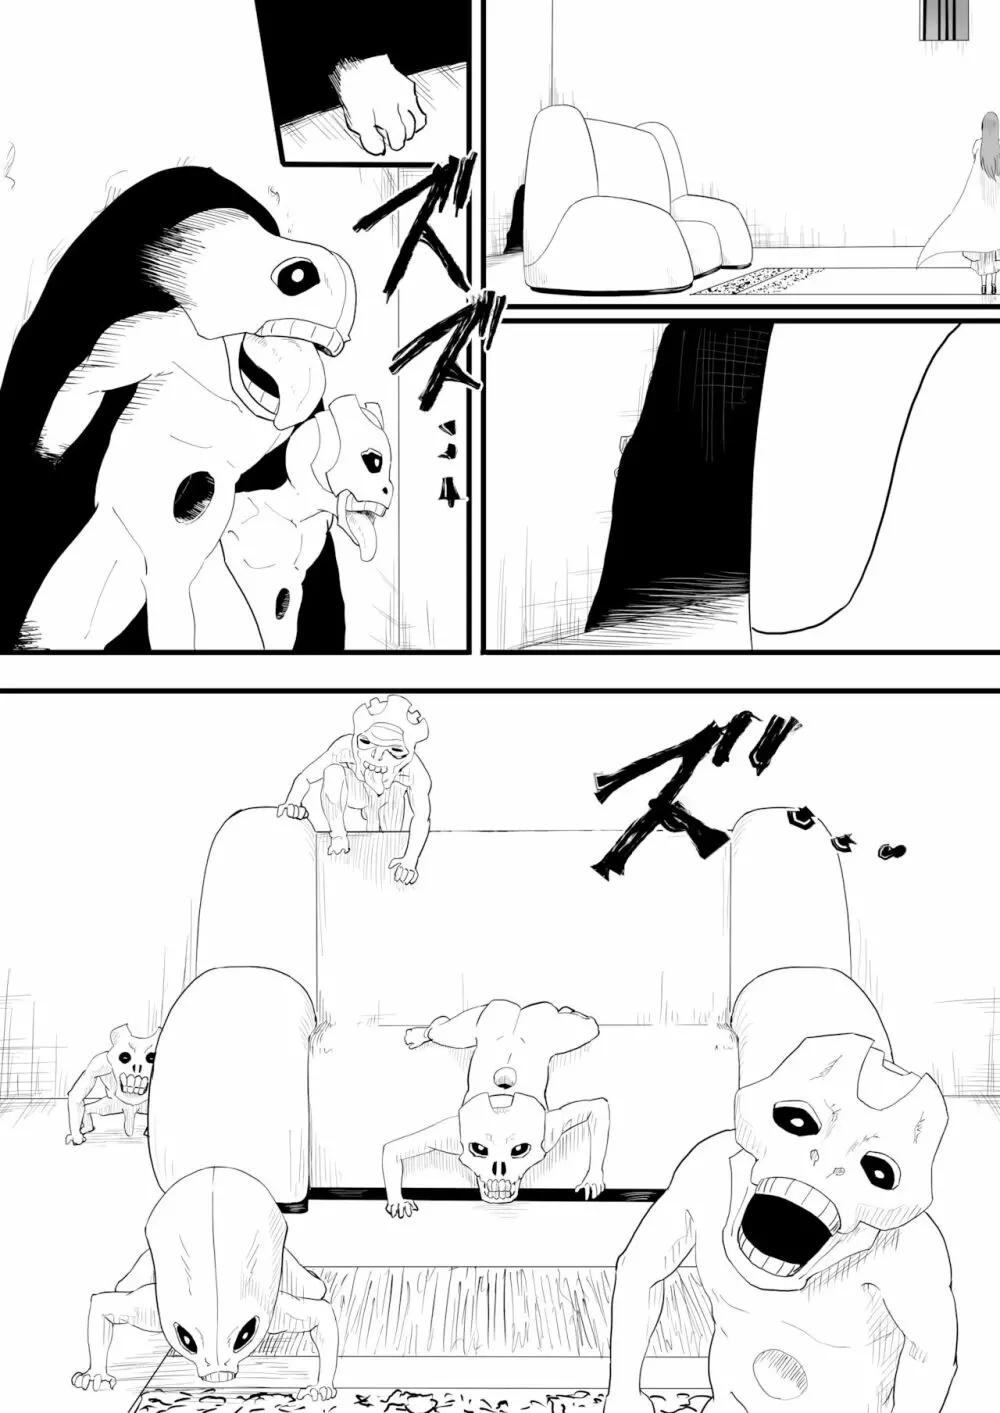 Orihime is attacked by goblin-like hollows - page2